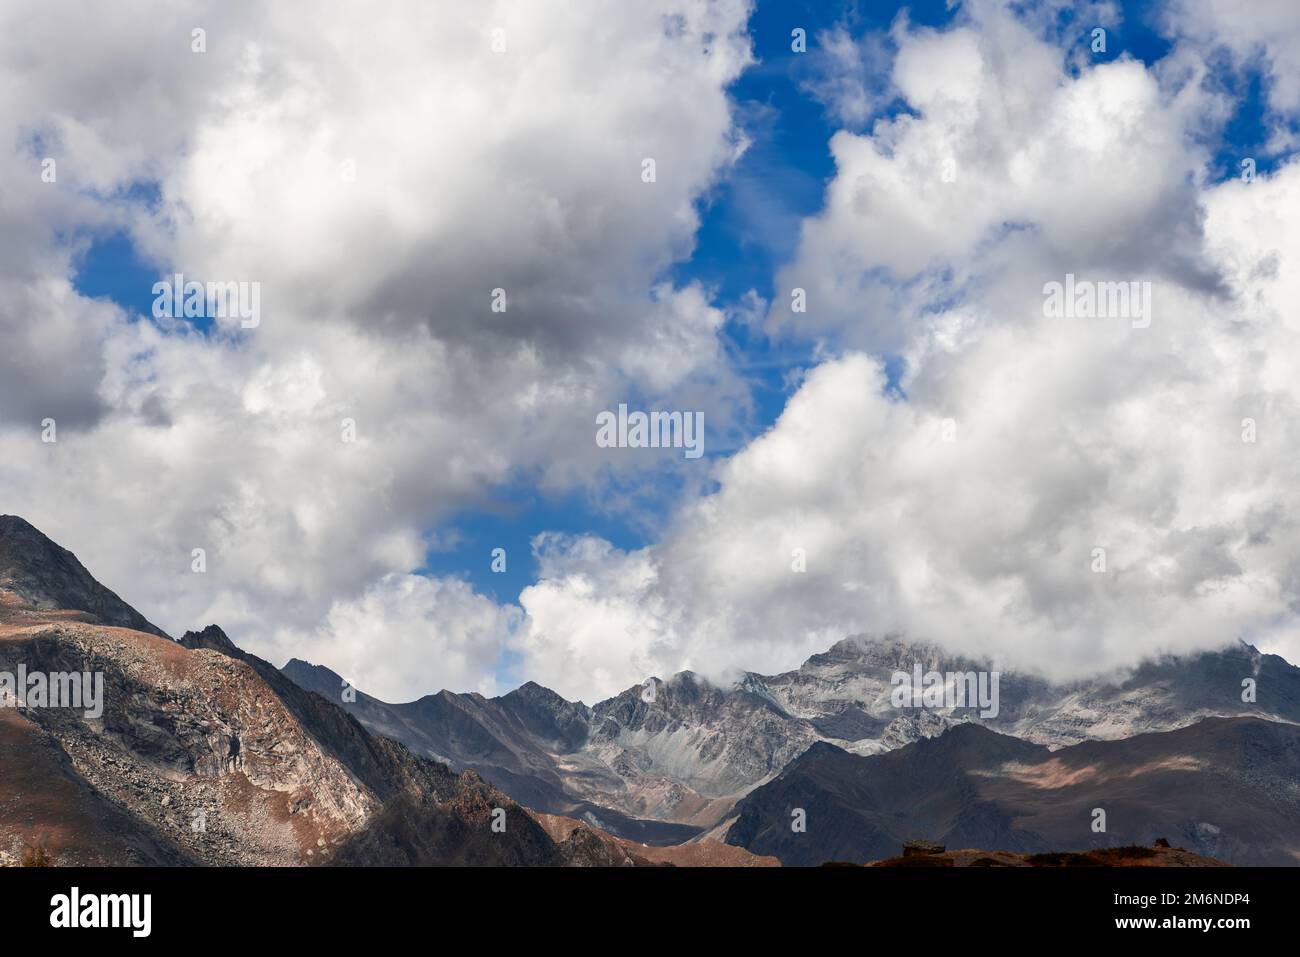 Heavy white clouds in blue sky leave shadows on granite slopes of alpine mountains in Parco Nazionale Gran Paradiso in autumn, Aosta Valley, Italy Stock Photo